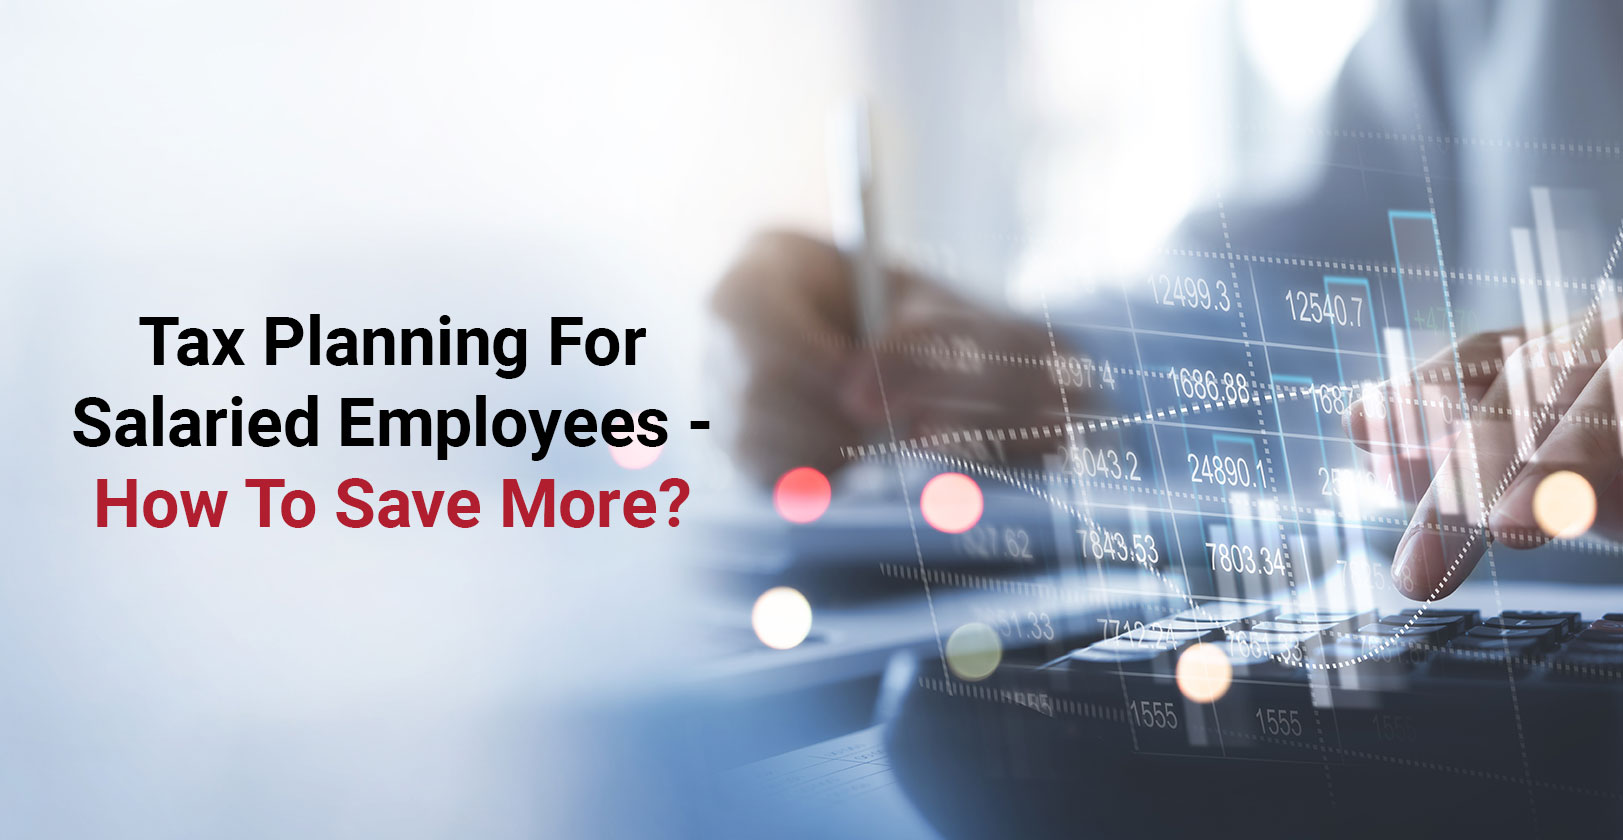 Tax Planning For Salaried Employees - How To Save More?